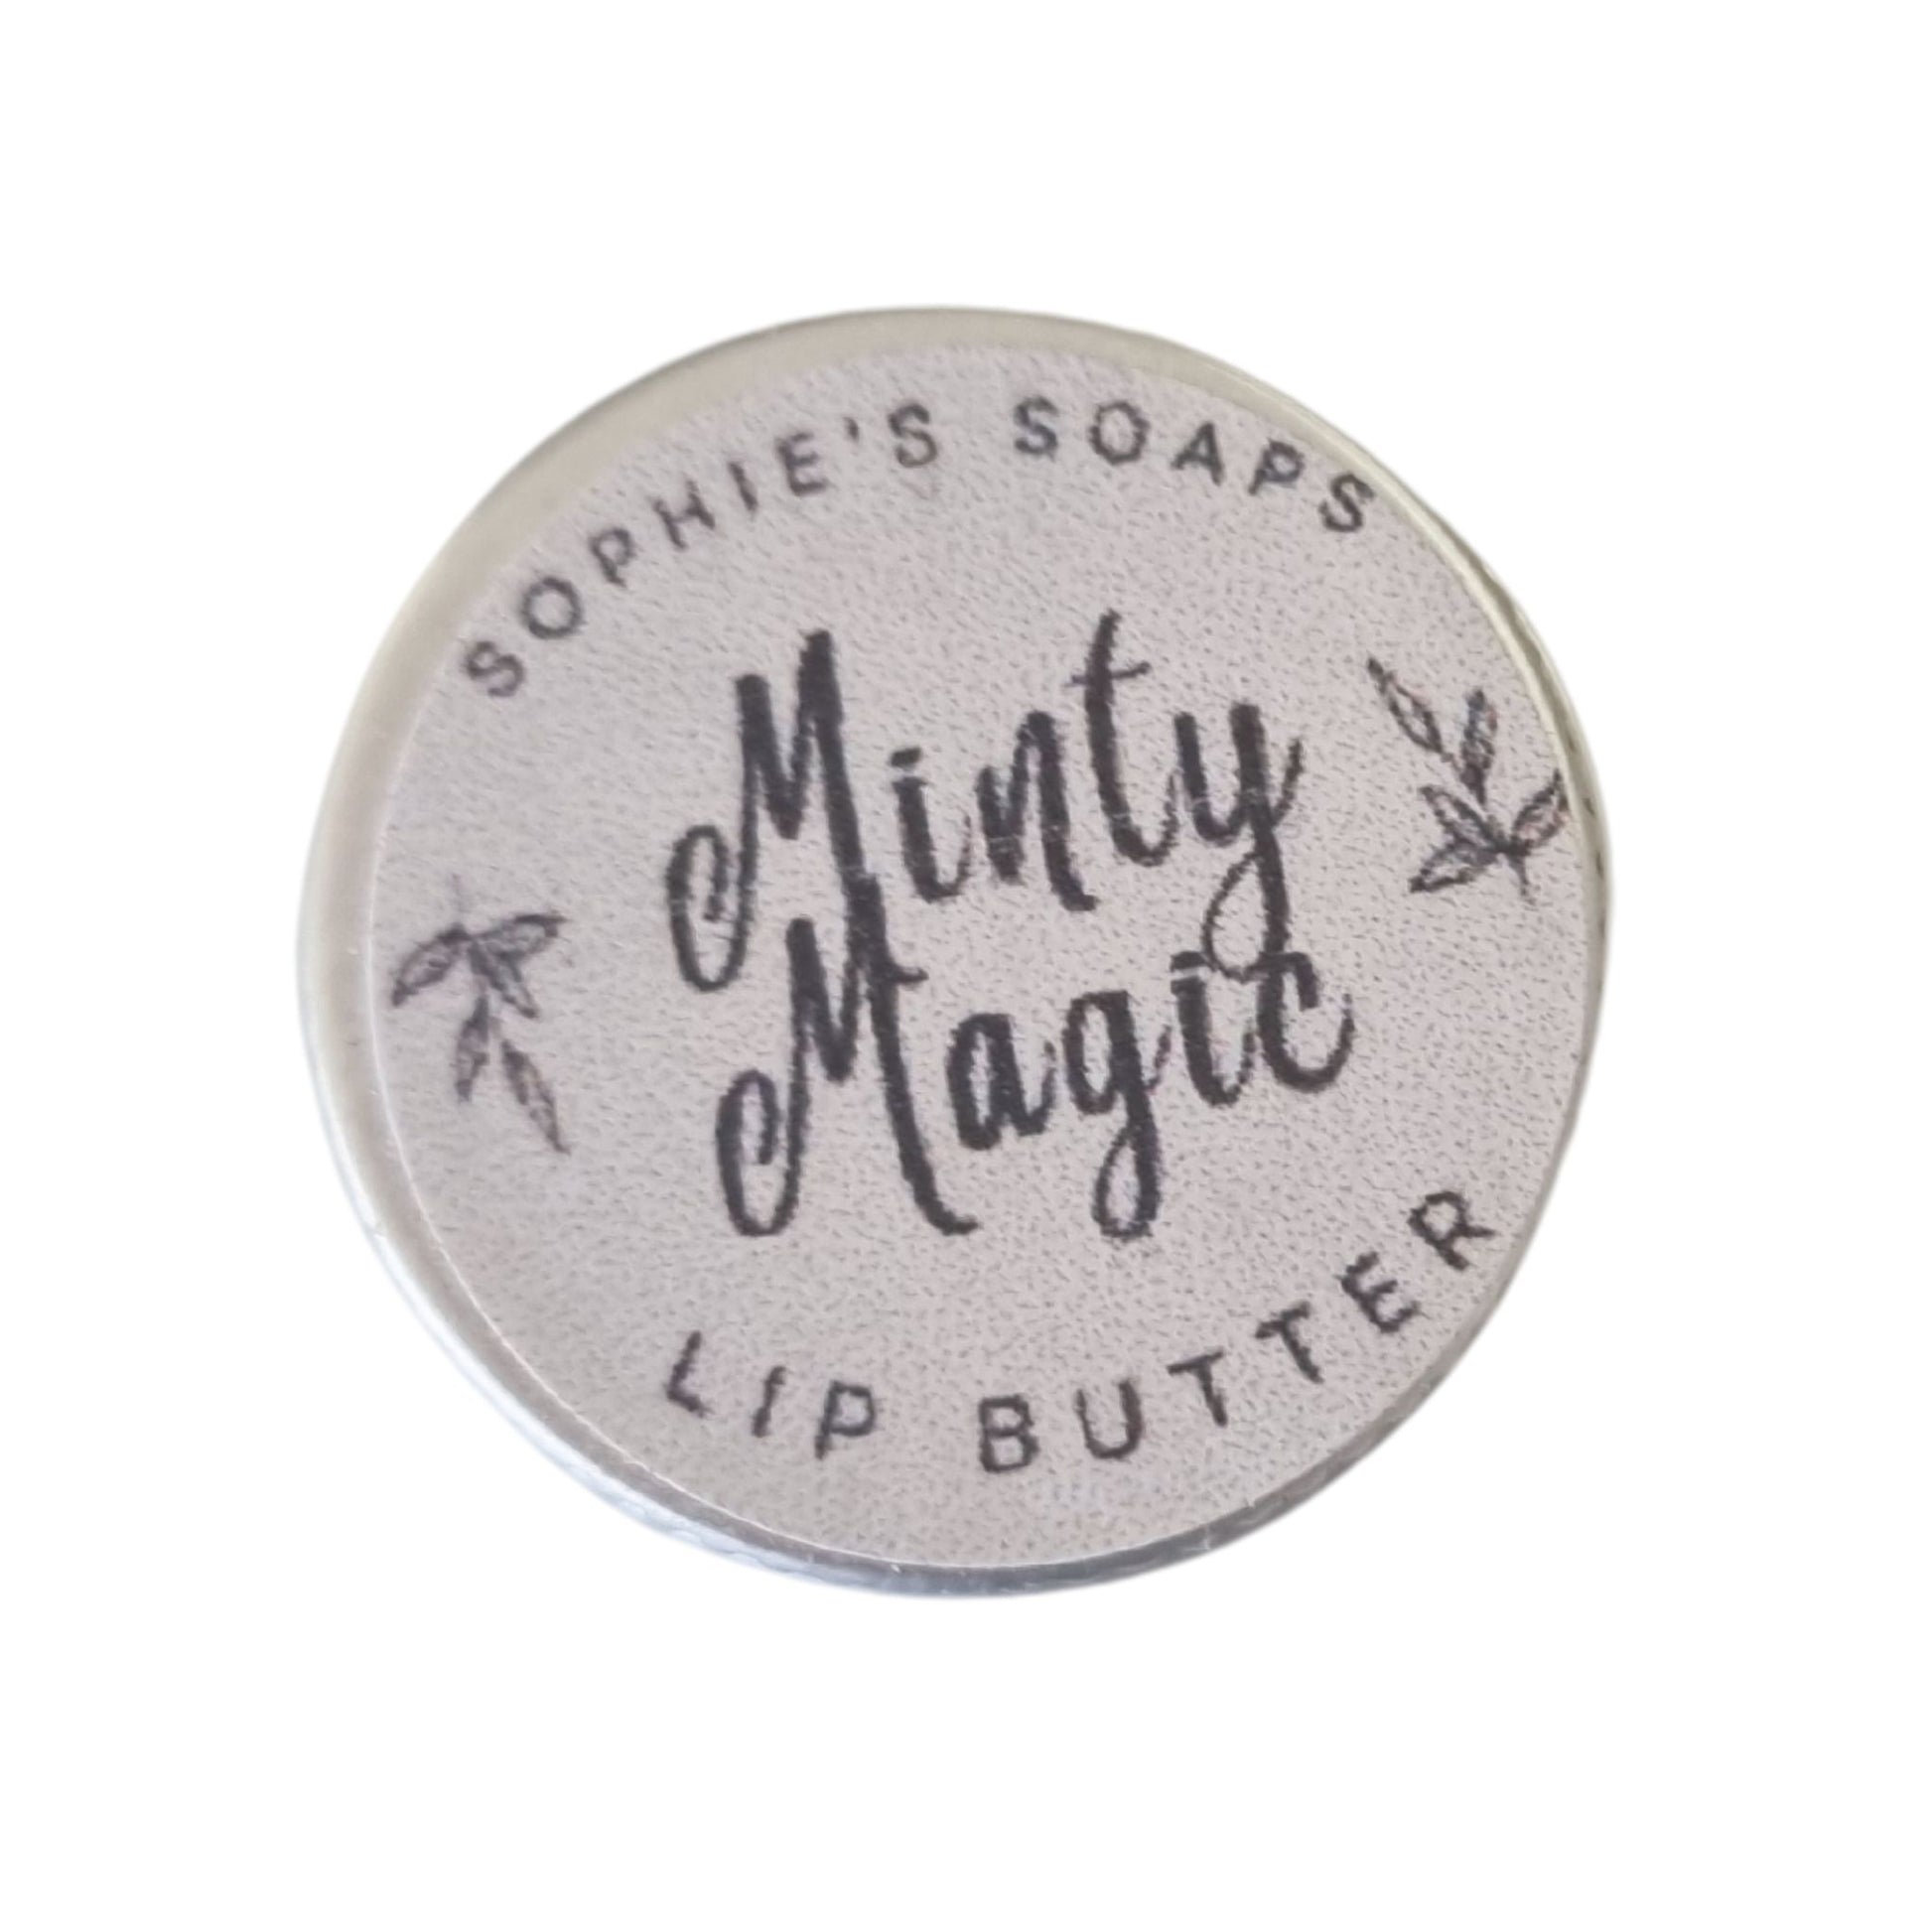 Minty Magic Lip Butter - Sophie's Soaps